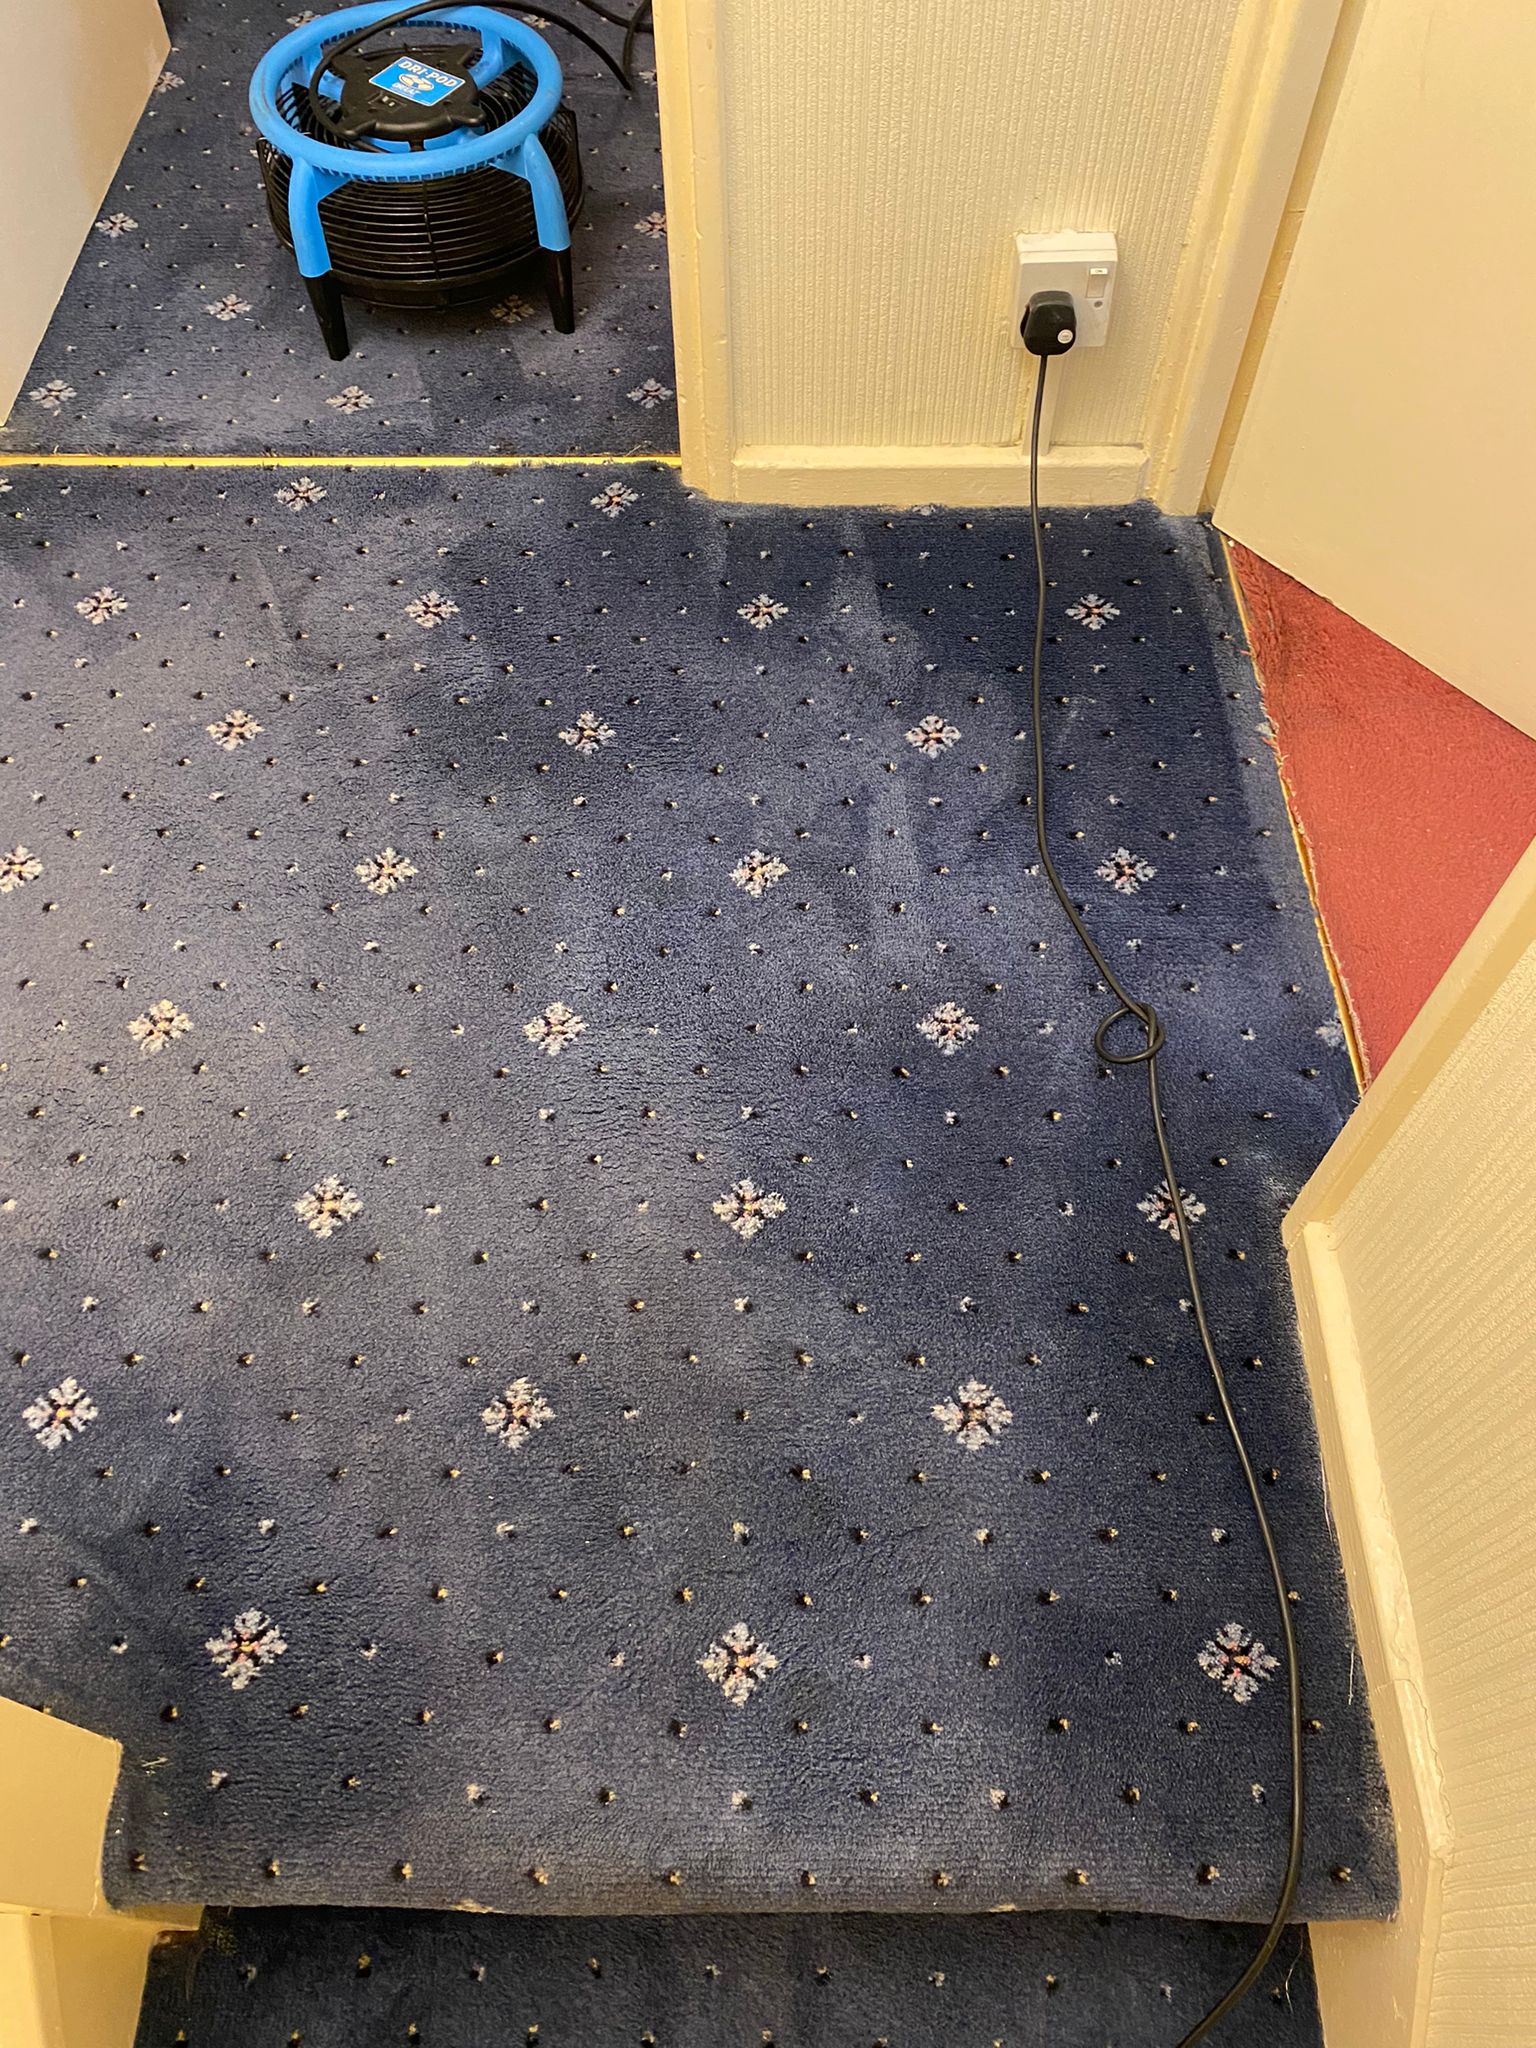 Stain removal on patterned carpet